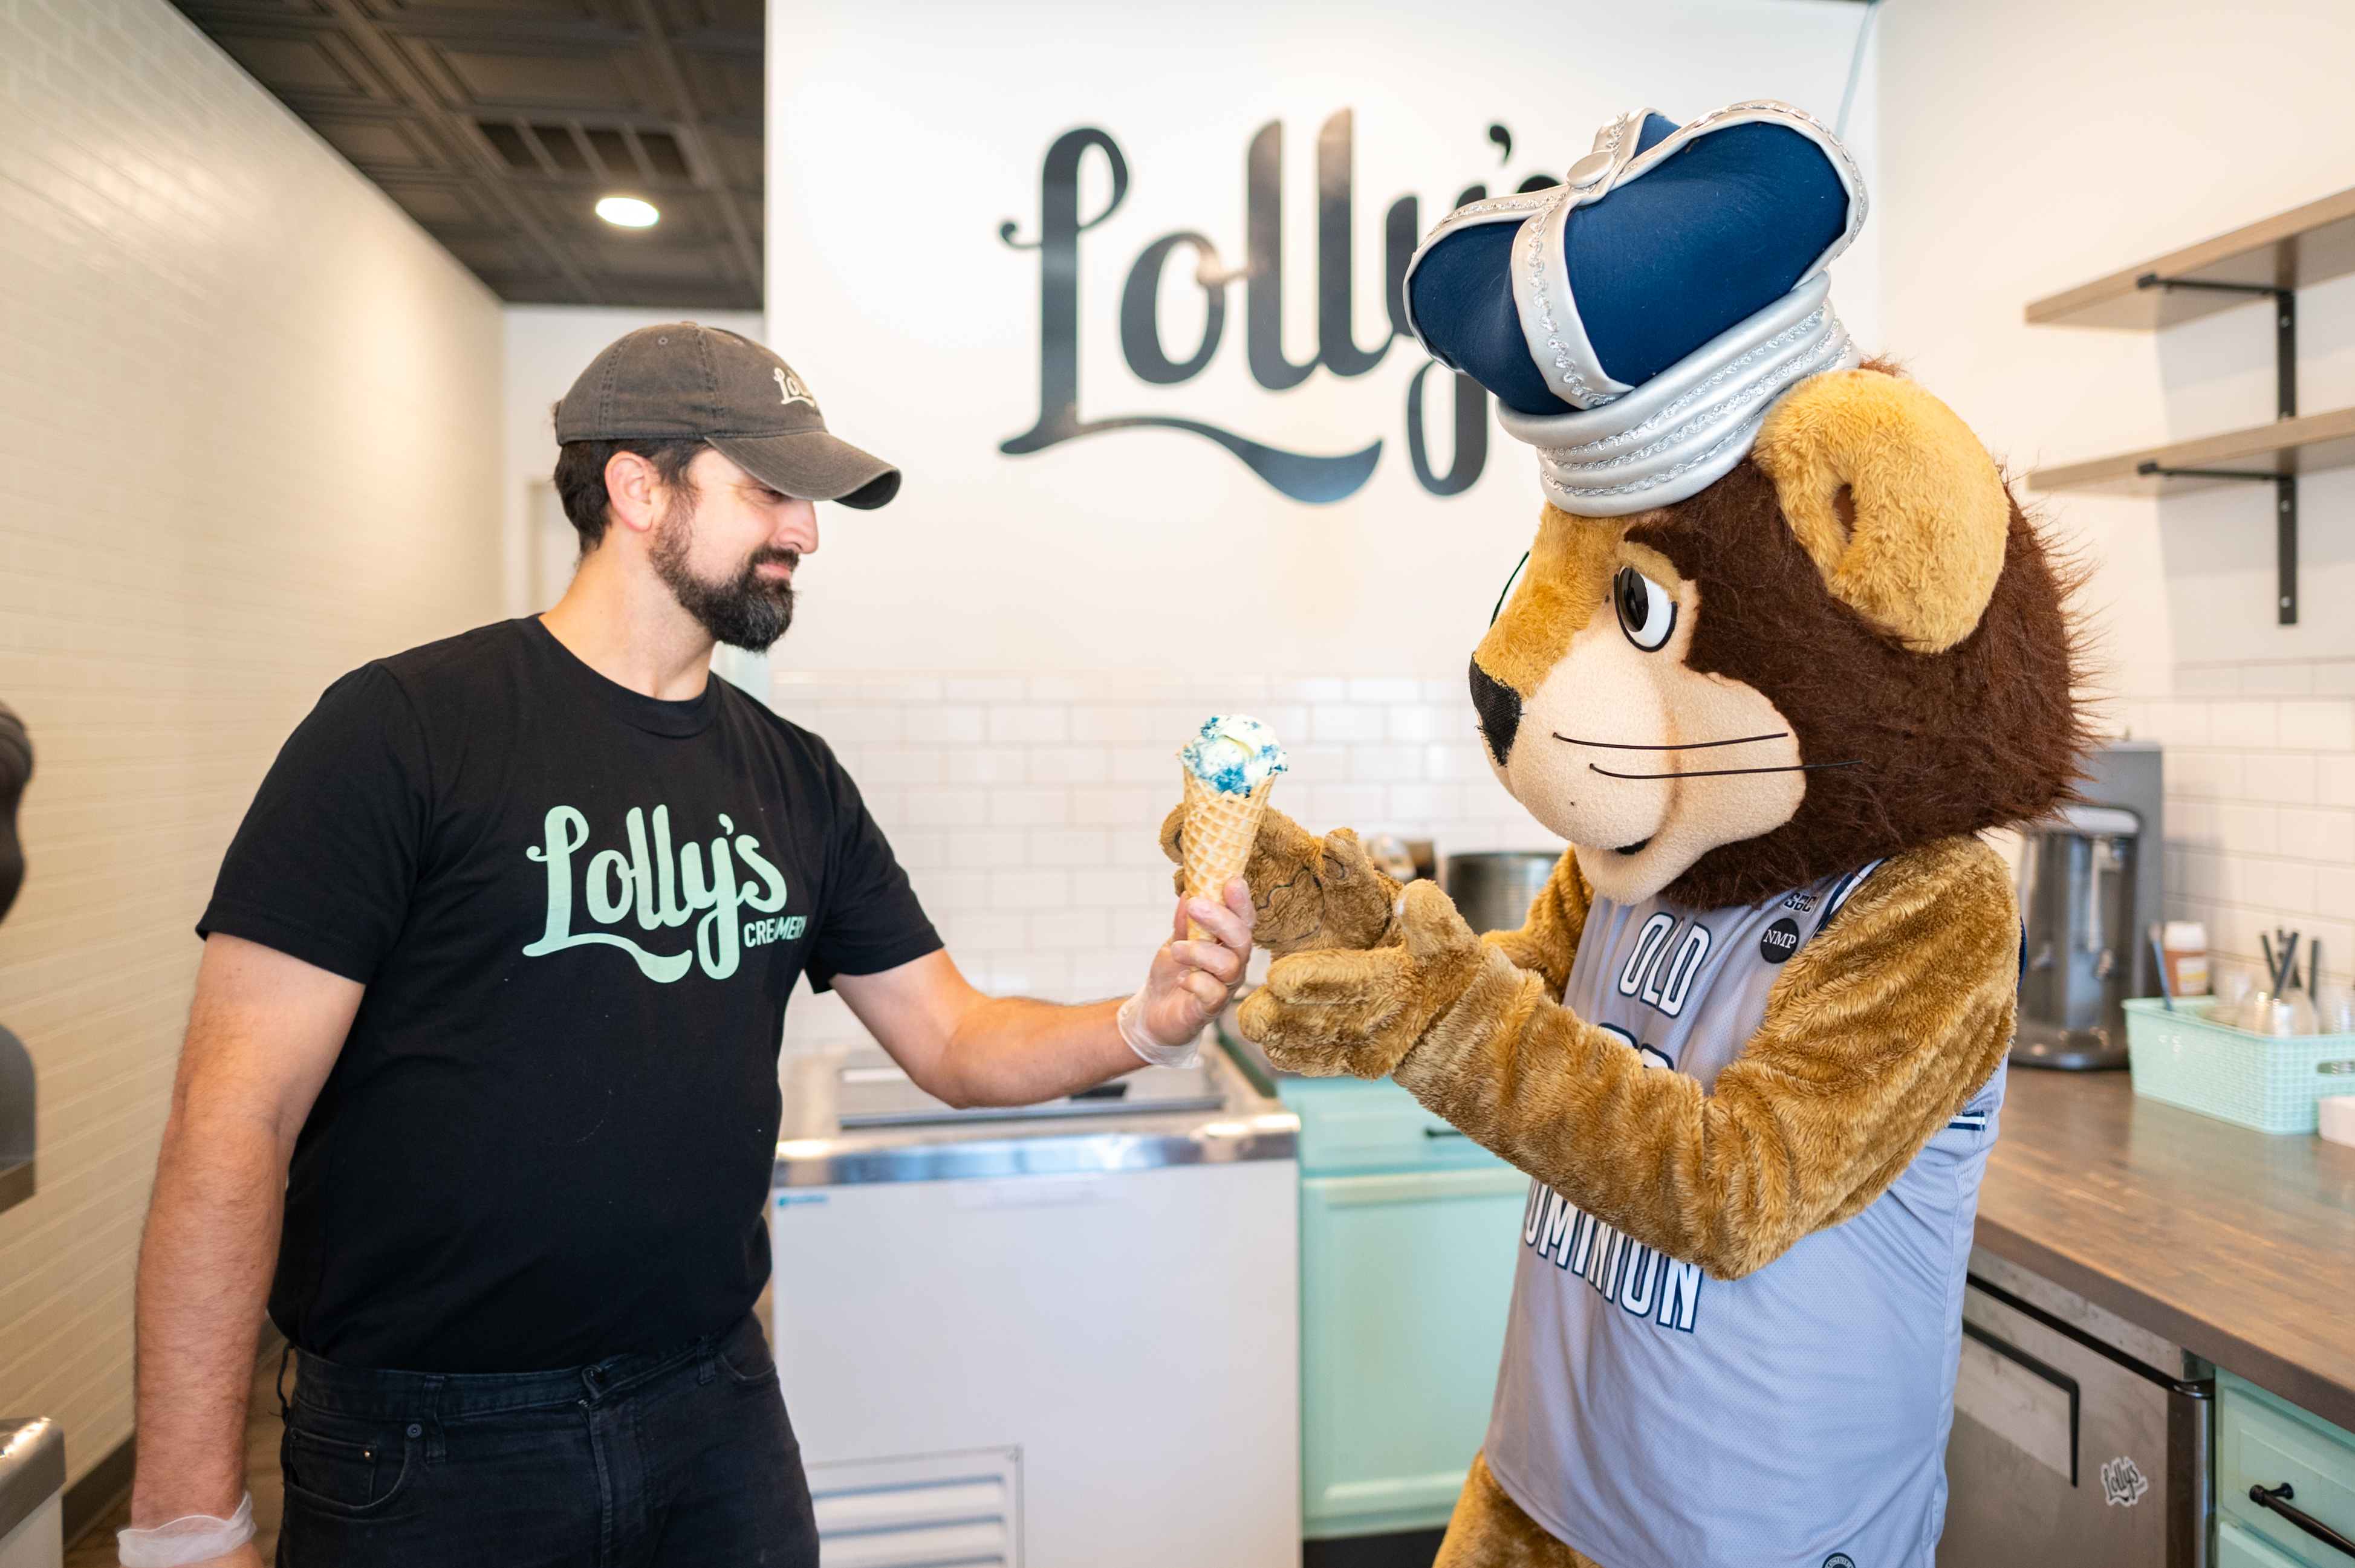 A man hands ice cream to a lion mascot.